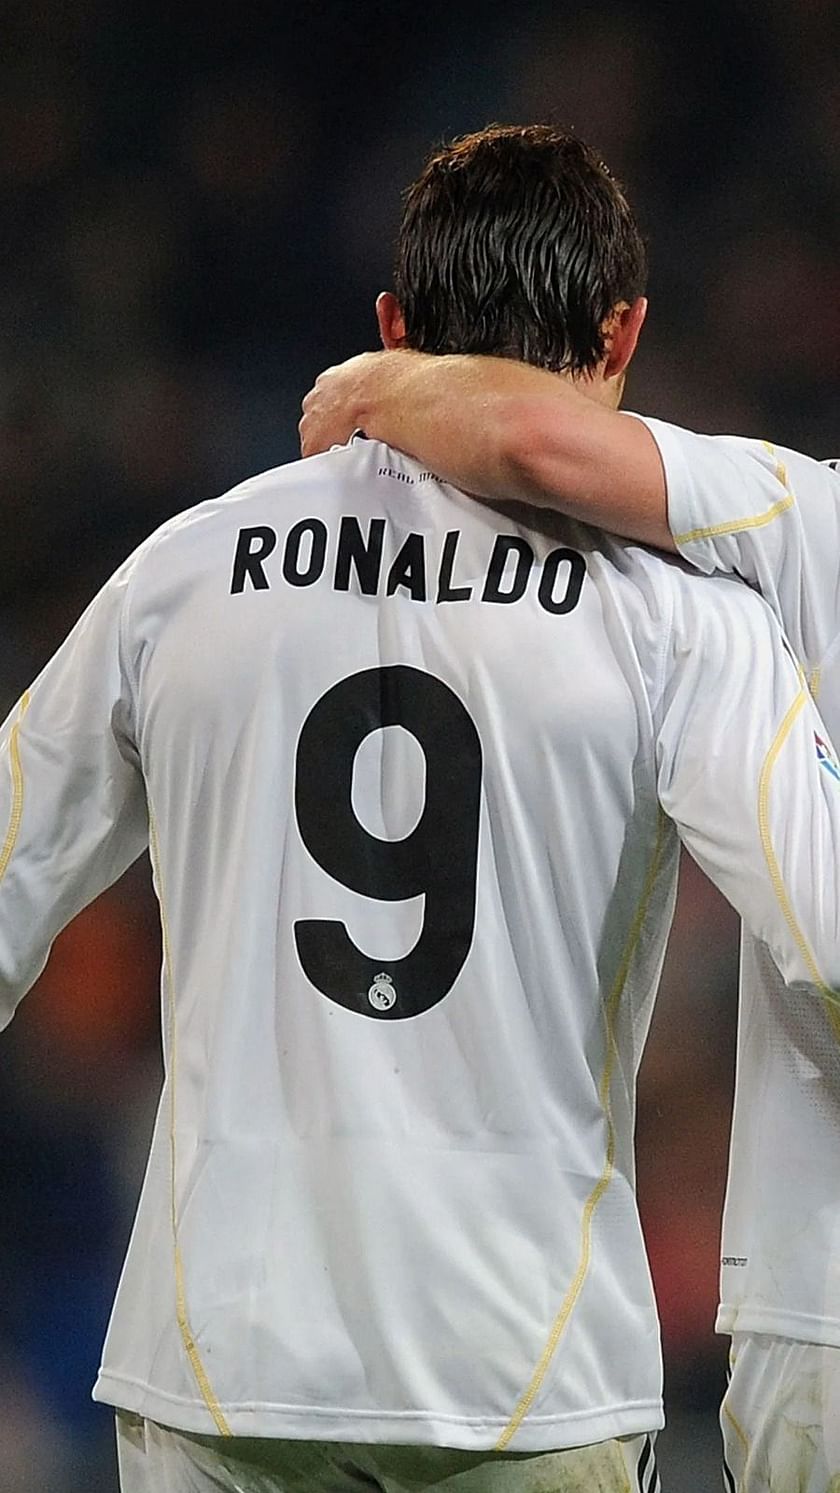 Men uvidenhed Credential Cristiano Ronaldo could wear two different shirt numbers at Manchester  United - Reports